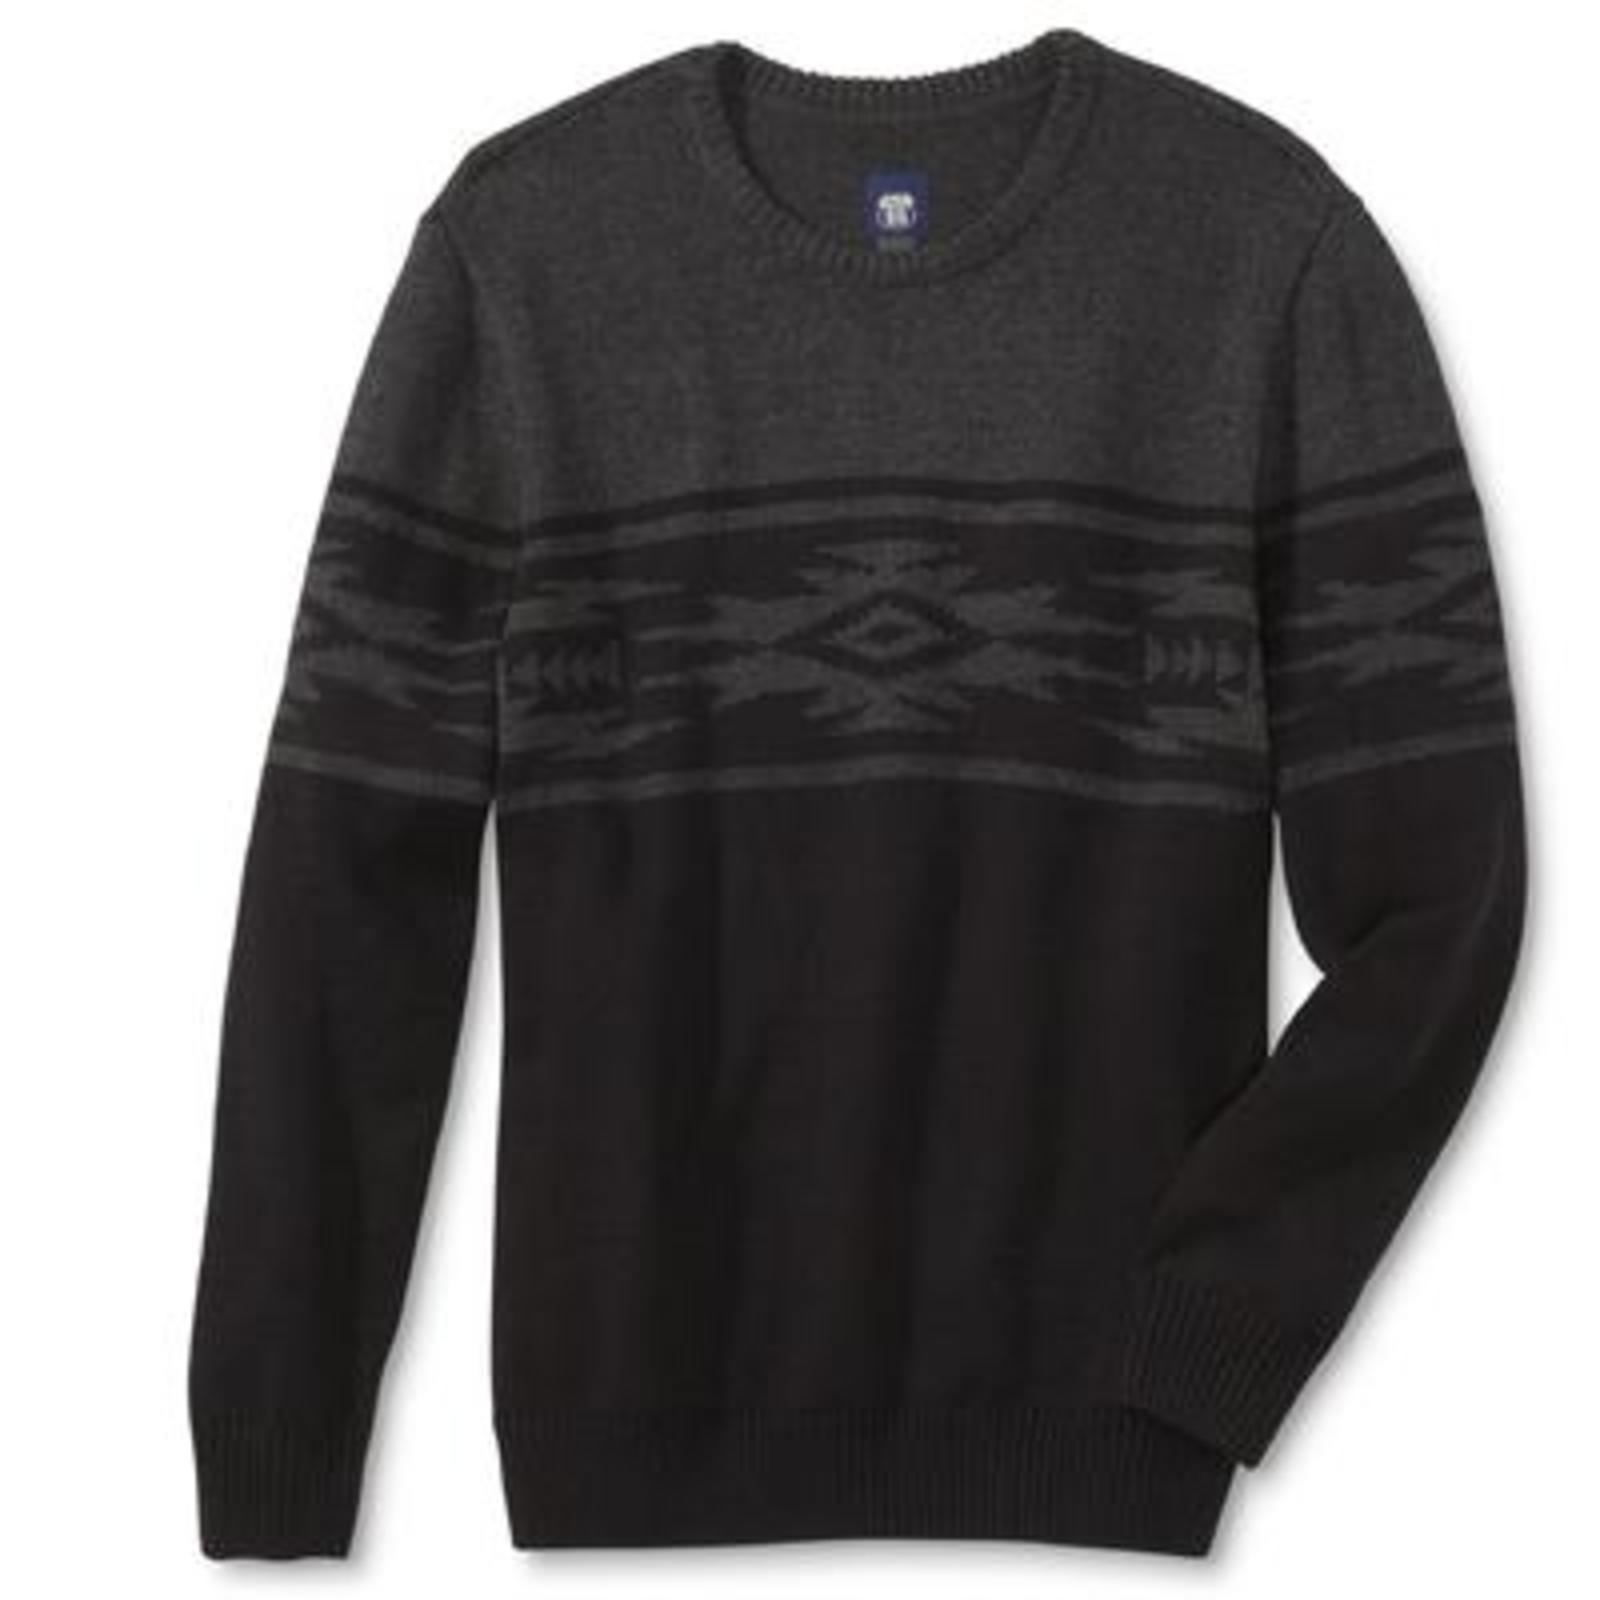 Route 66 Men's Sweater - Tribal